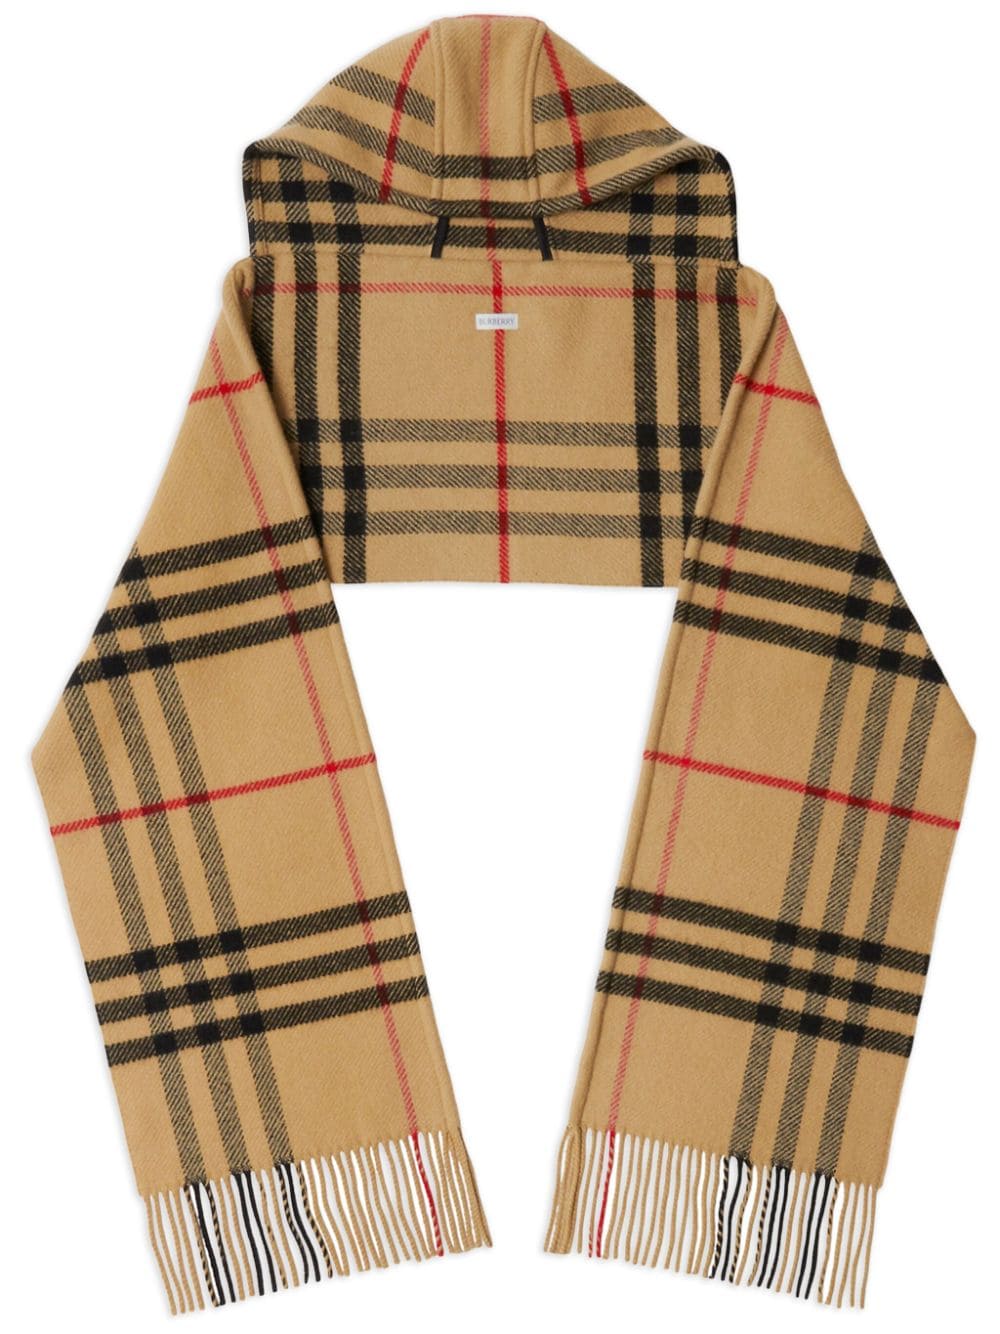 Burberry checked hooded scarf